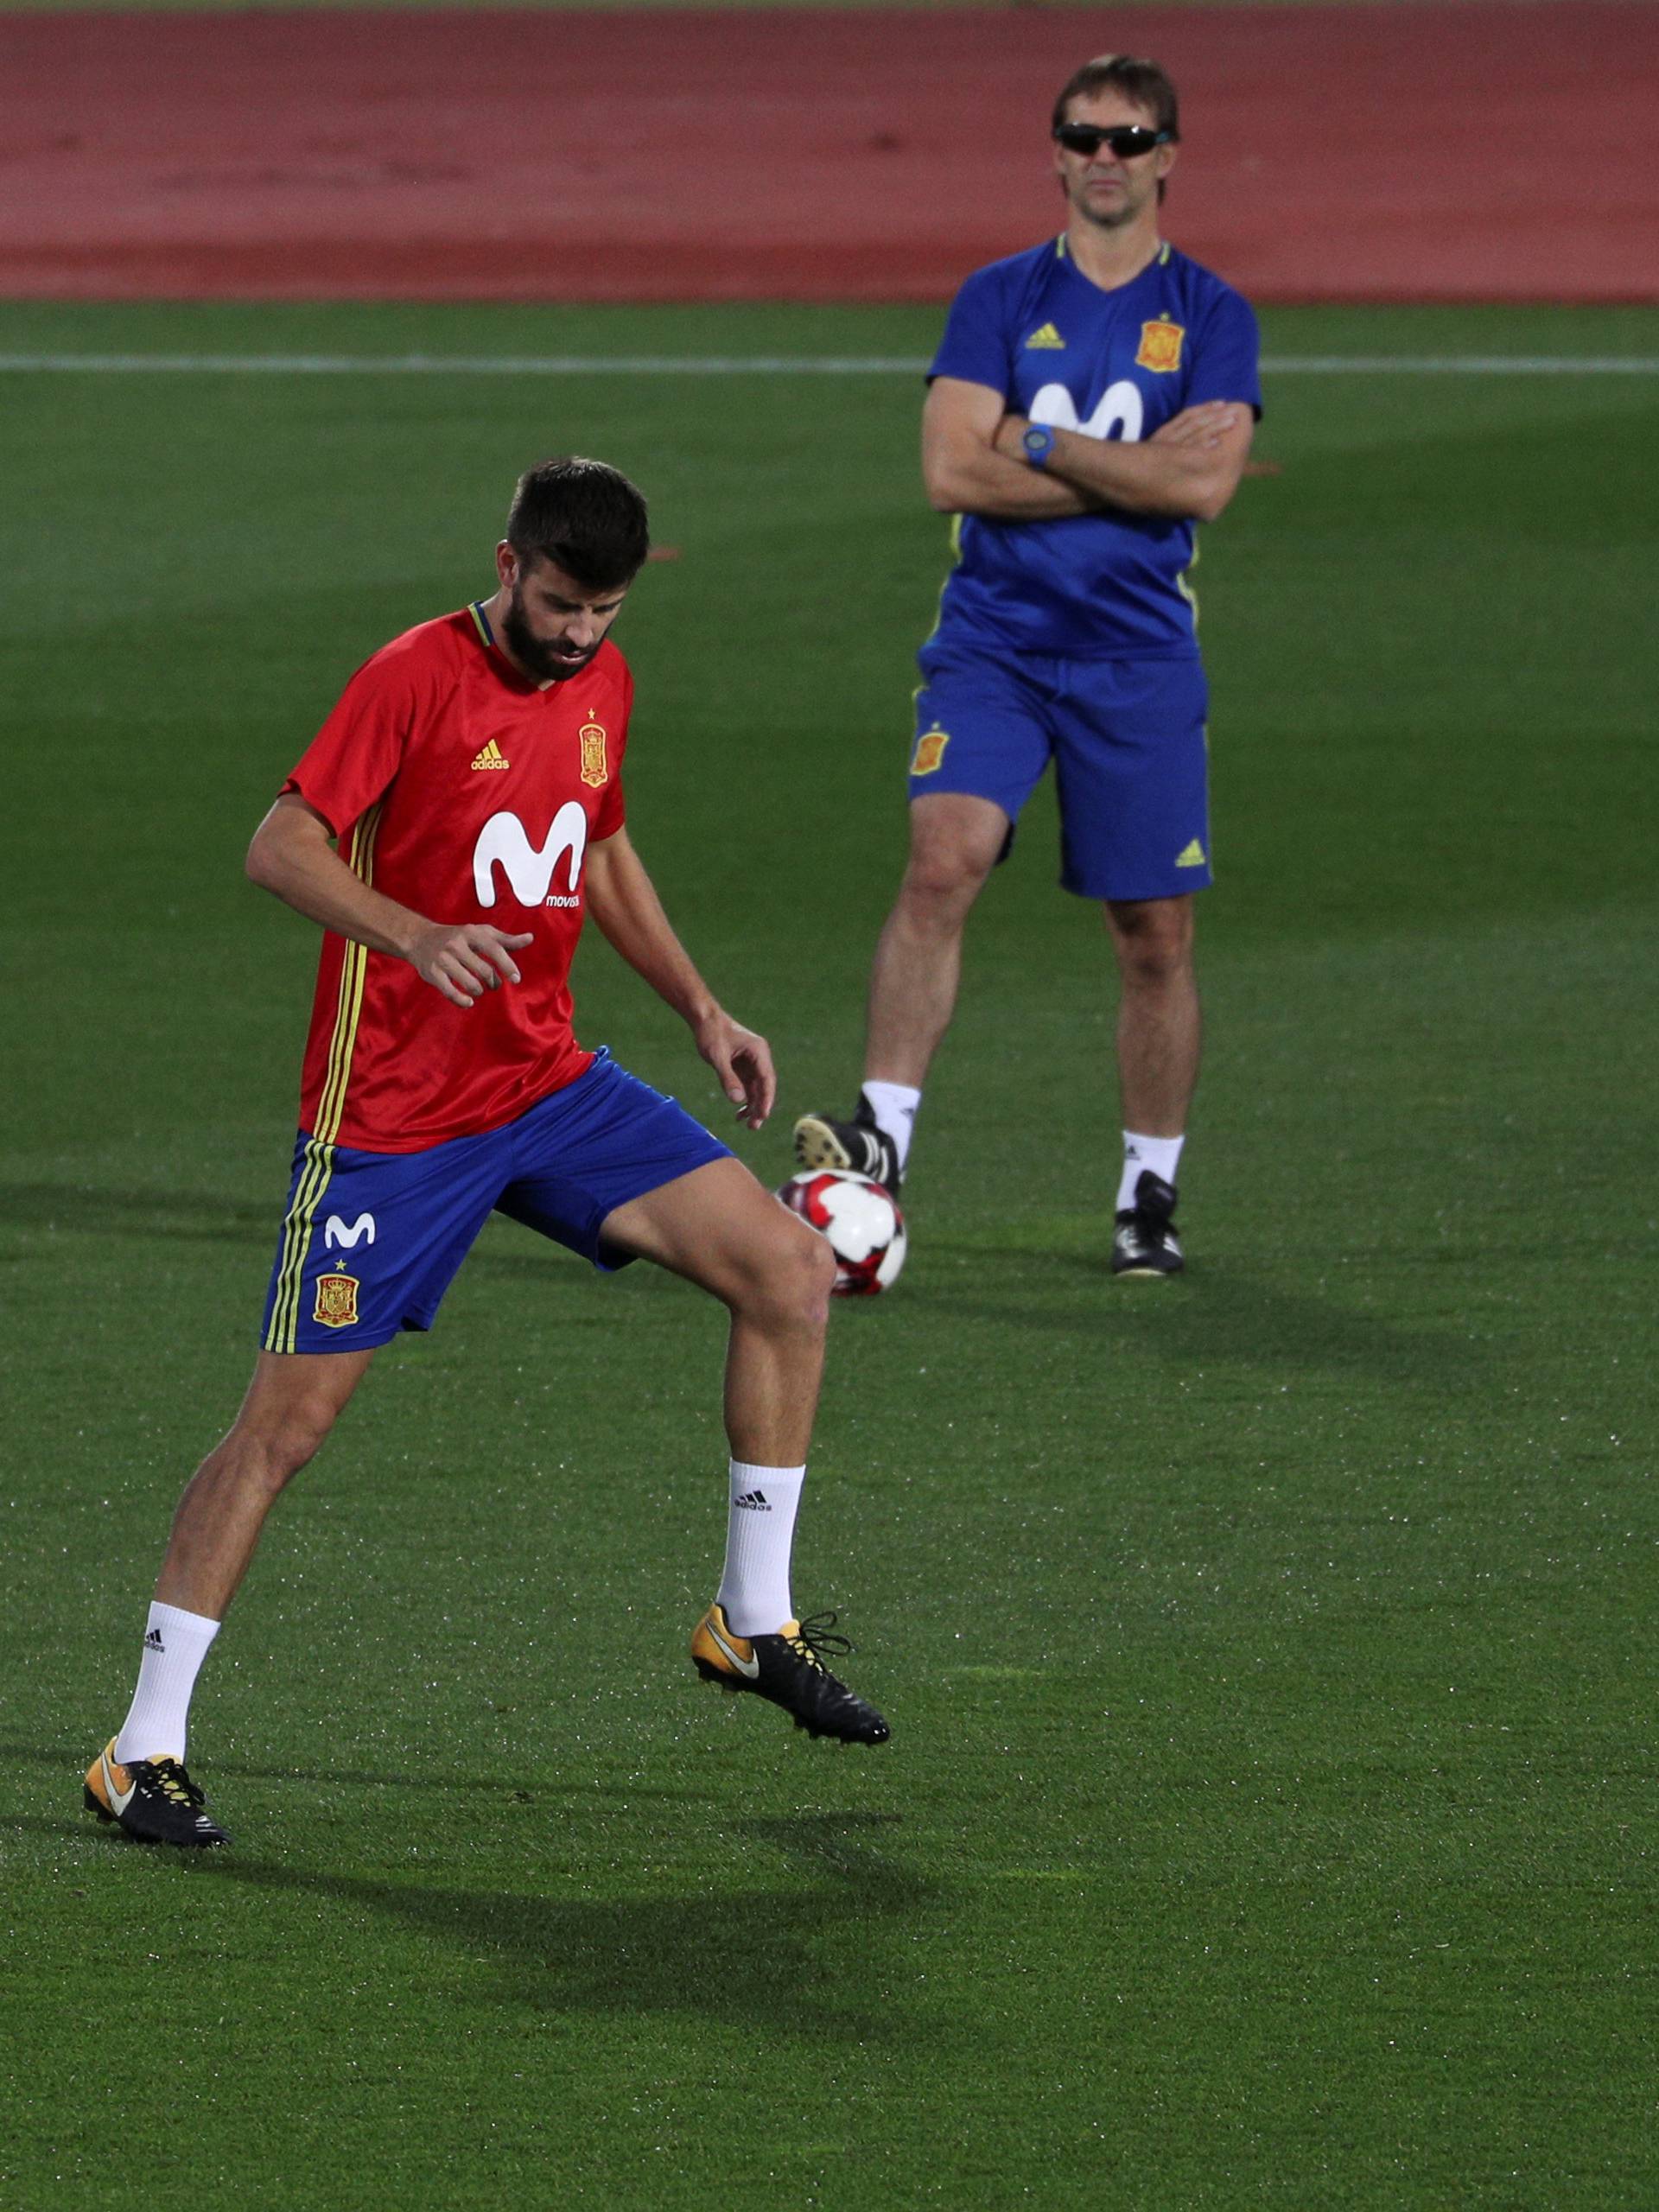 Spain's player Pique, exercises next to Alba and head coach Lopetegui during a training session in Las Rozas